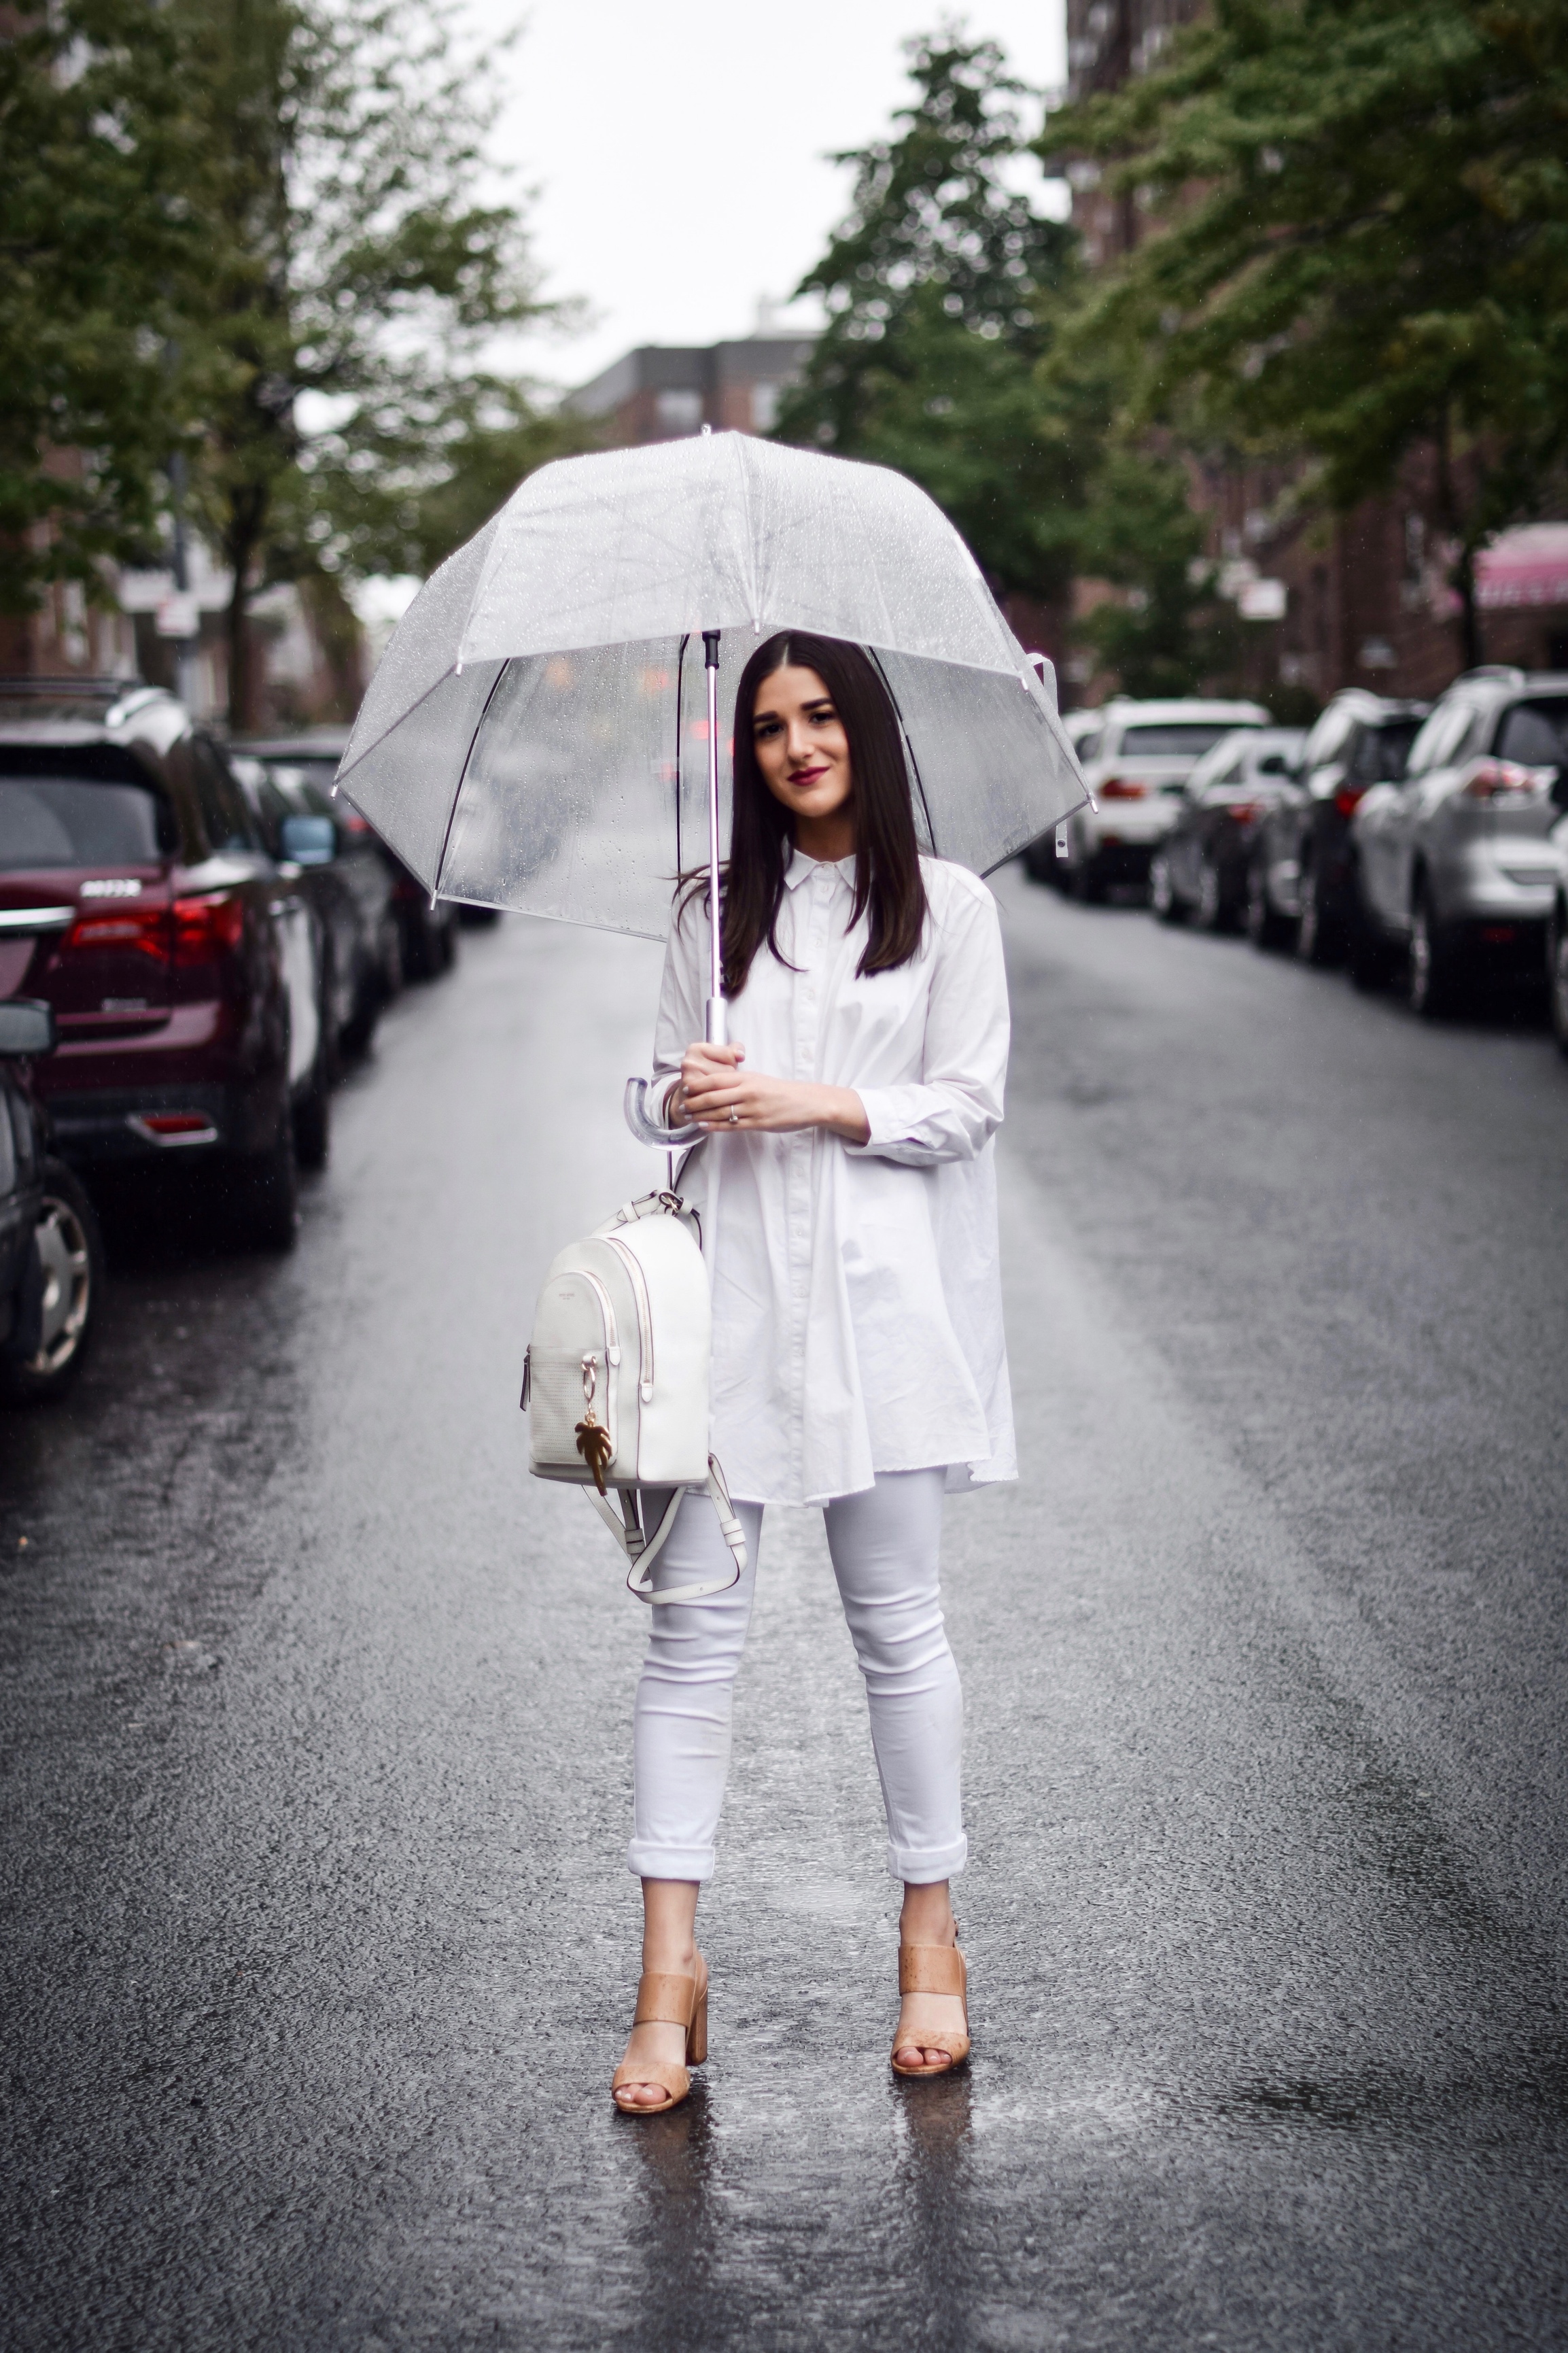 Why I Won't Be Bringing My Camera Or Laptop To Portugal Or Spain All White Look Esther Santer Fashion Blog NYC Street Style Blogger Outfit OOTD Trendy Shopping Umbrella Rainy Day Button Down Sandals Heels Zara Pants Straight Hair Travel Women New York.jpg